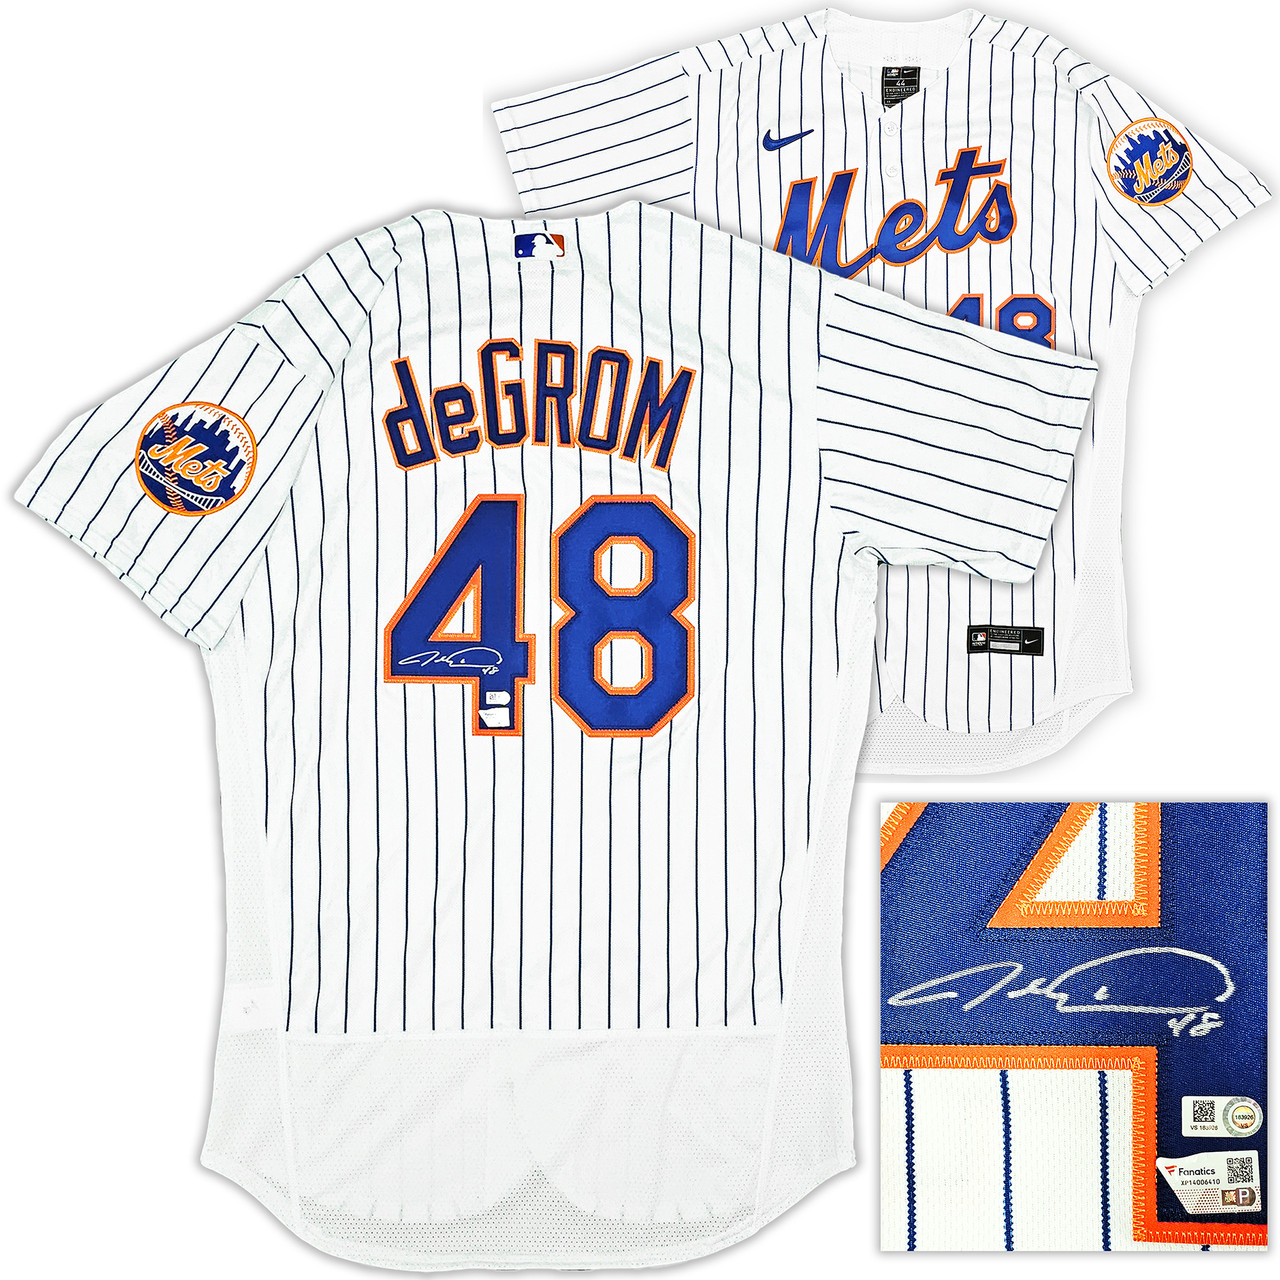 Mets Jacob deGrom Autographed White Nike Authentic Jersey Size 44 Fanatics